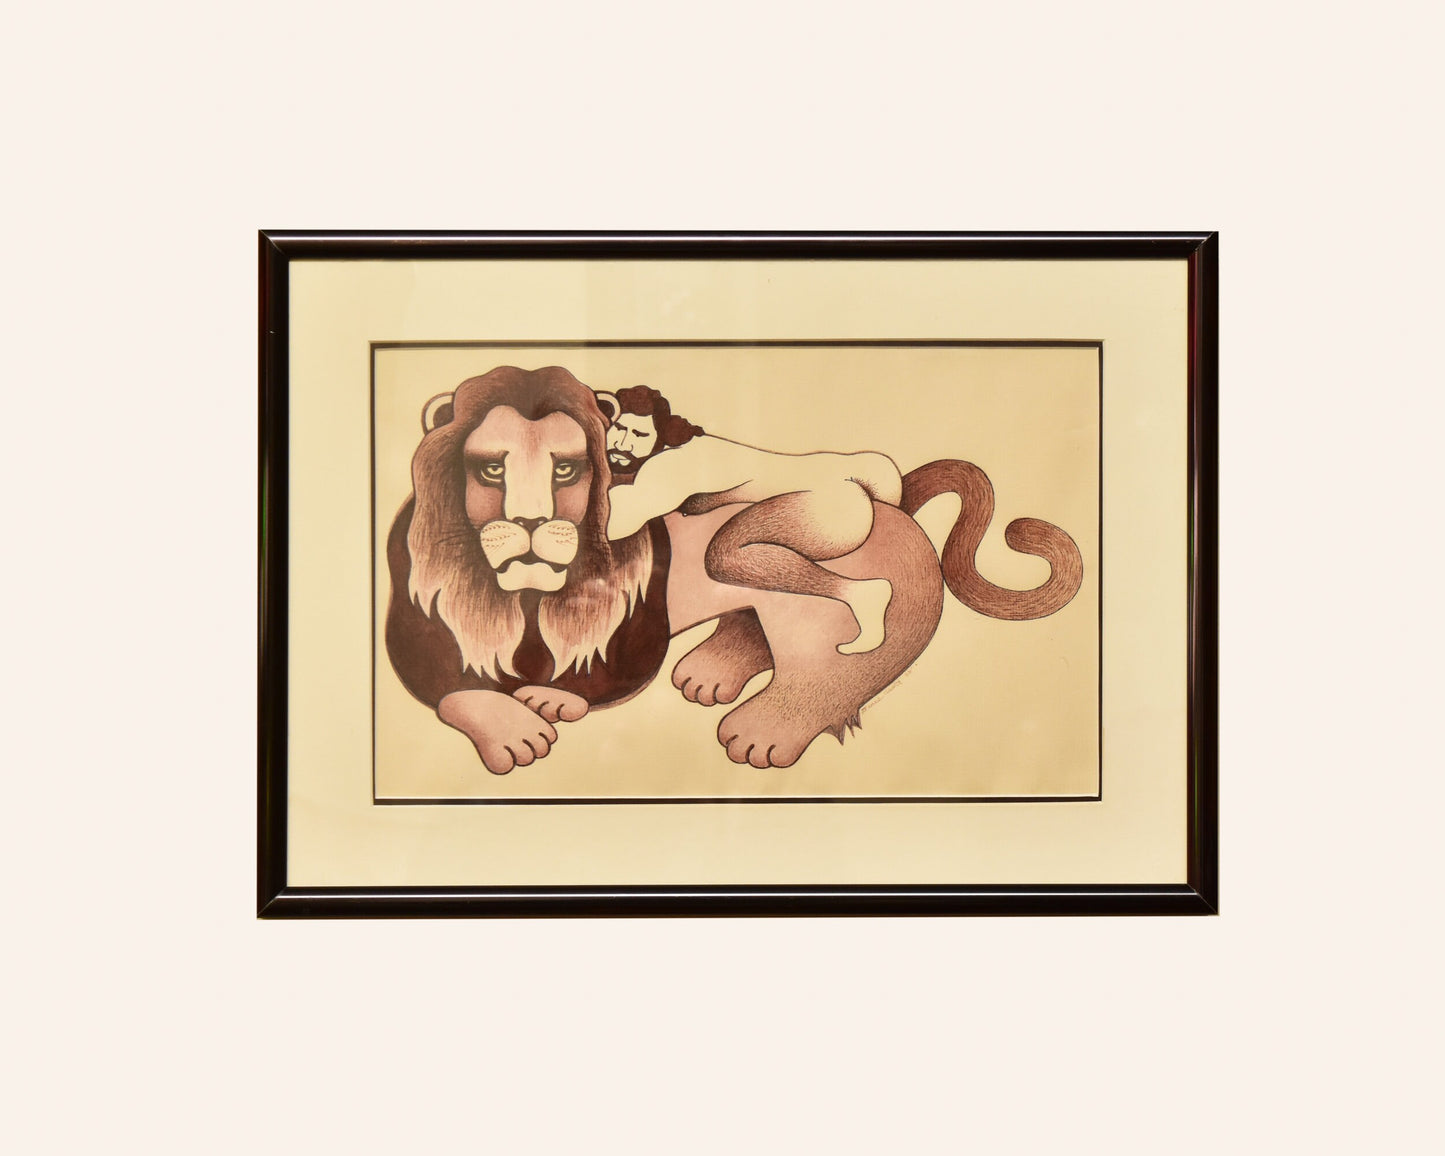 Framed 1988 Nude Man On Maned Lion Drawing/Painting, Unknown Artist, Vintage Erotica Wall Art, 16.75" X 12"